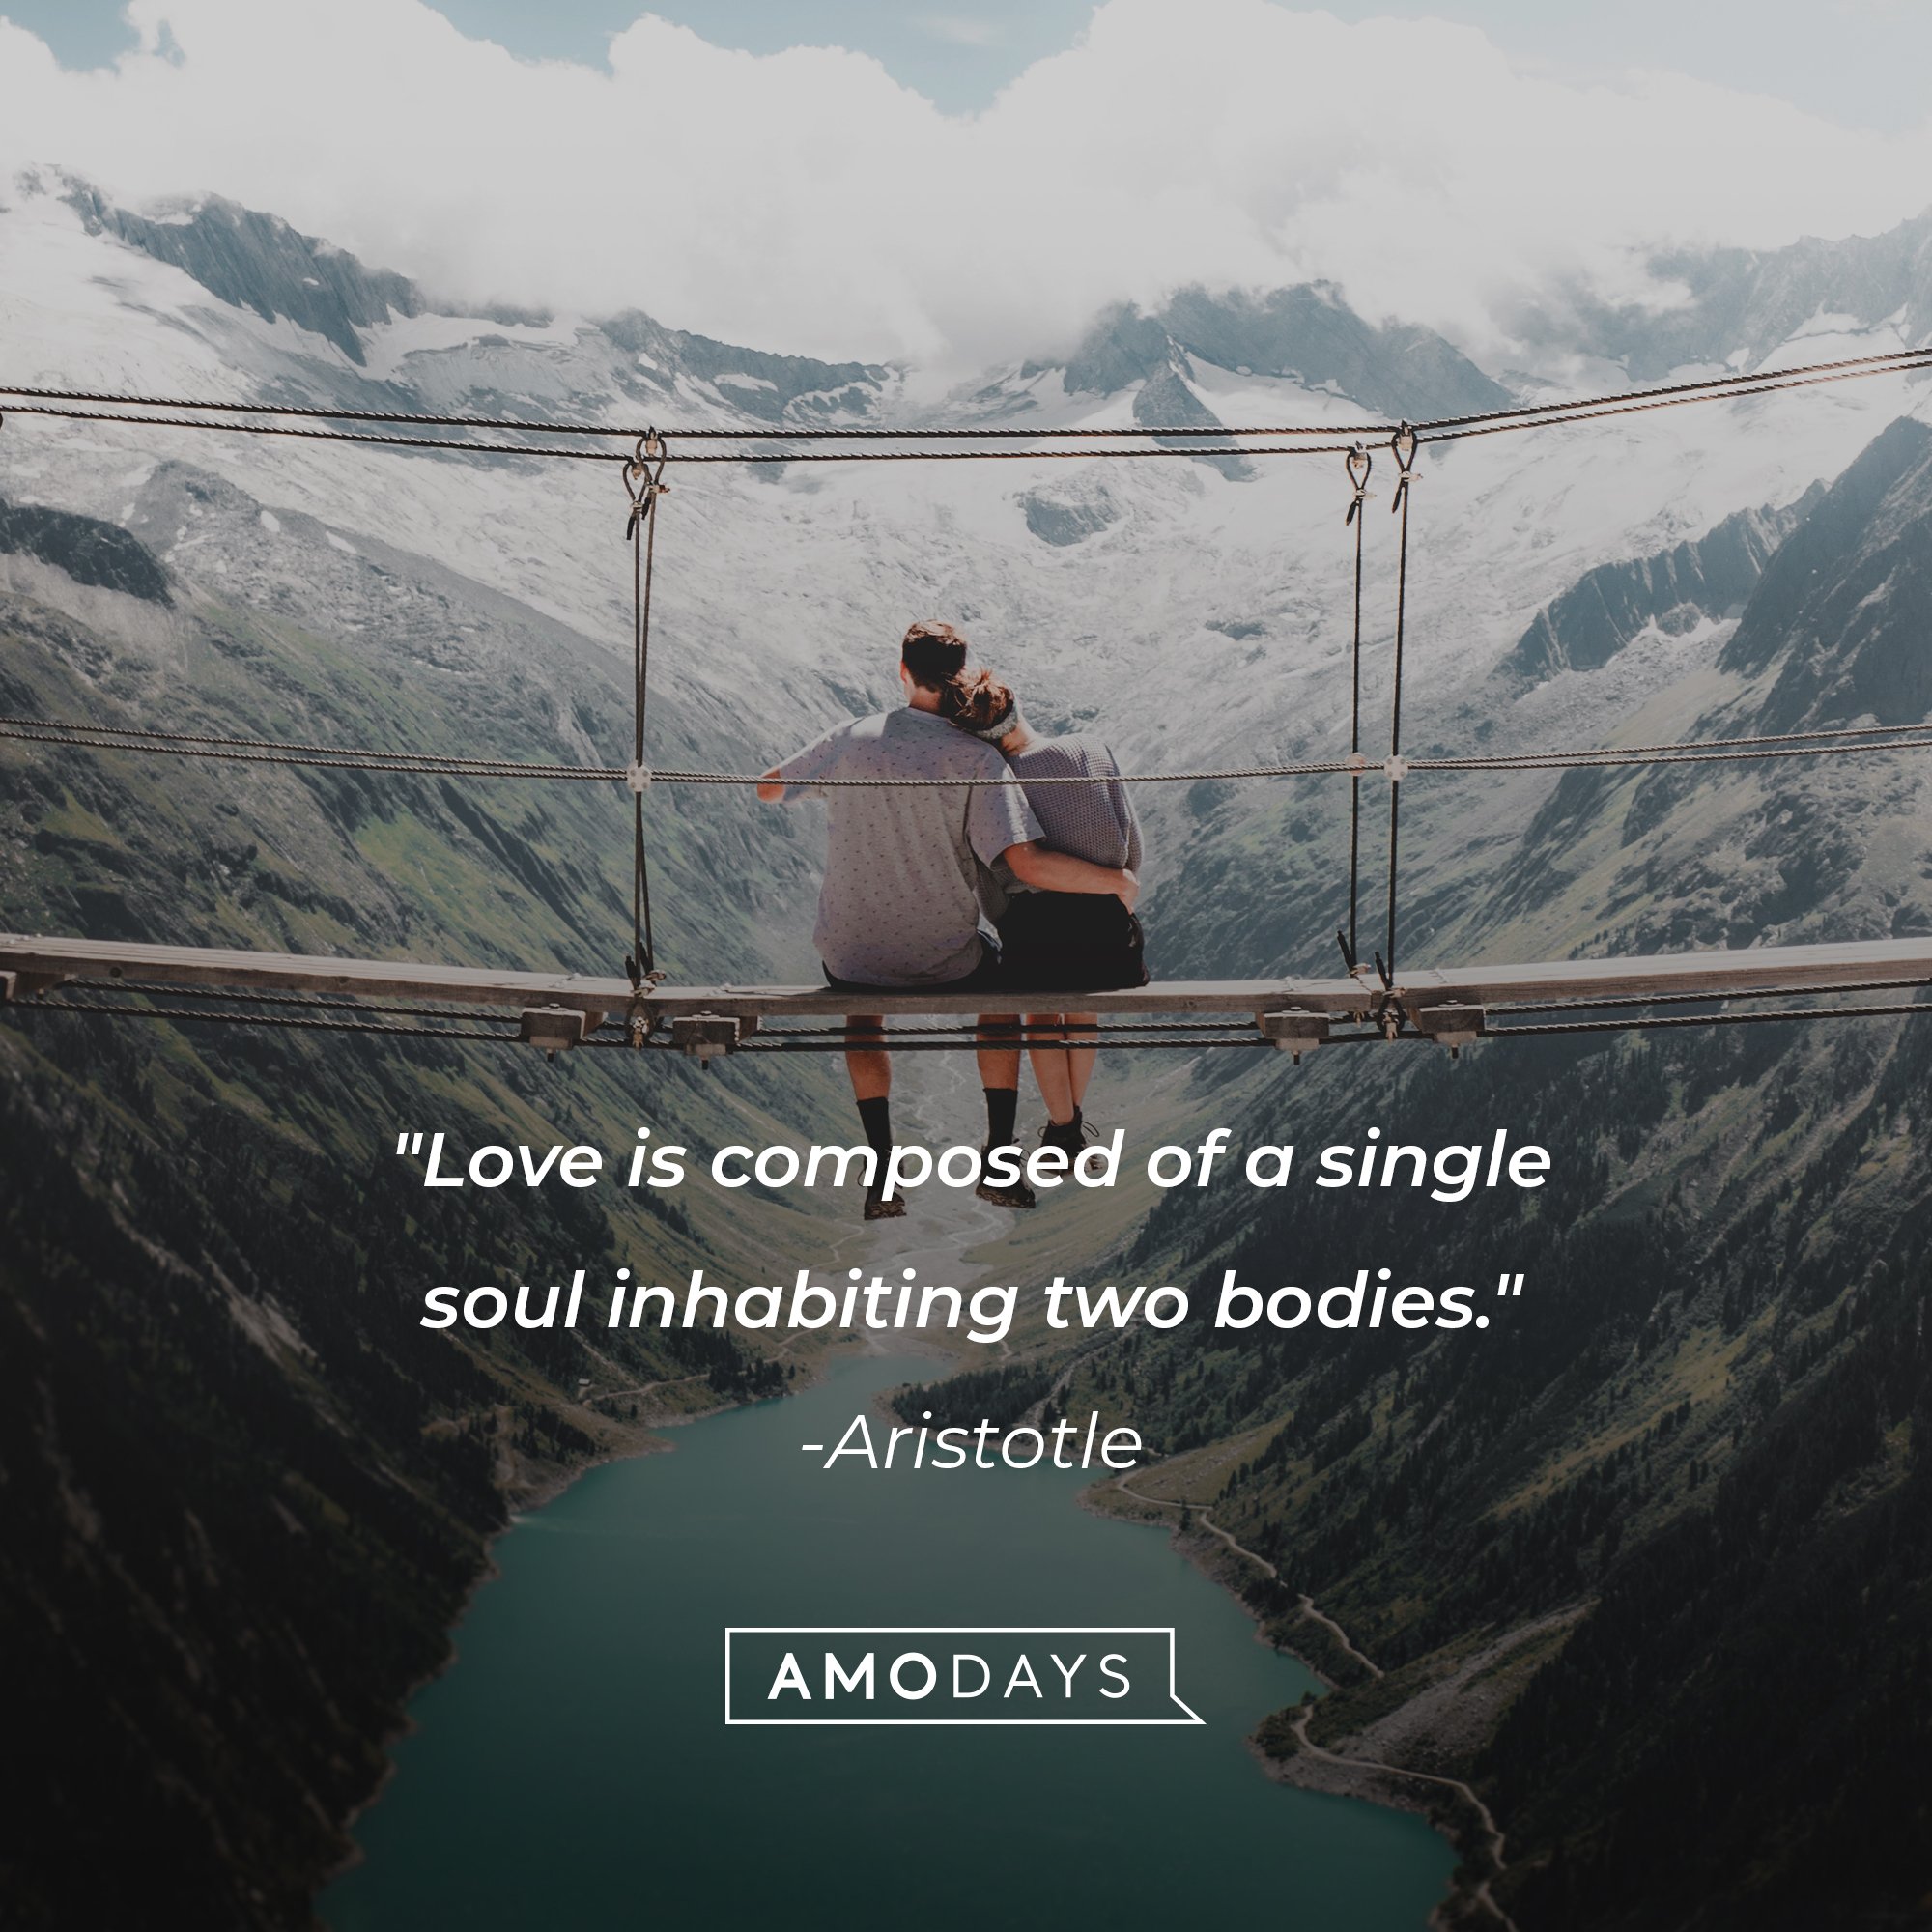 Aristotle’s quote: "Love is composed of a single soul inhabiting two bodies." | Image: AmoDays